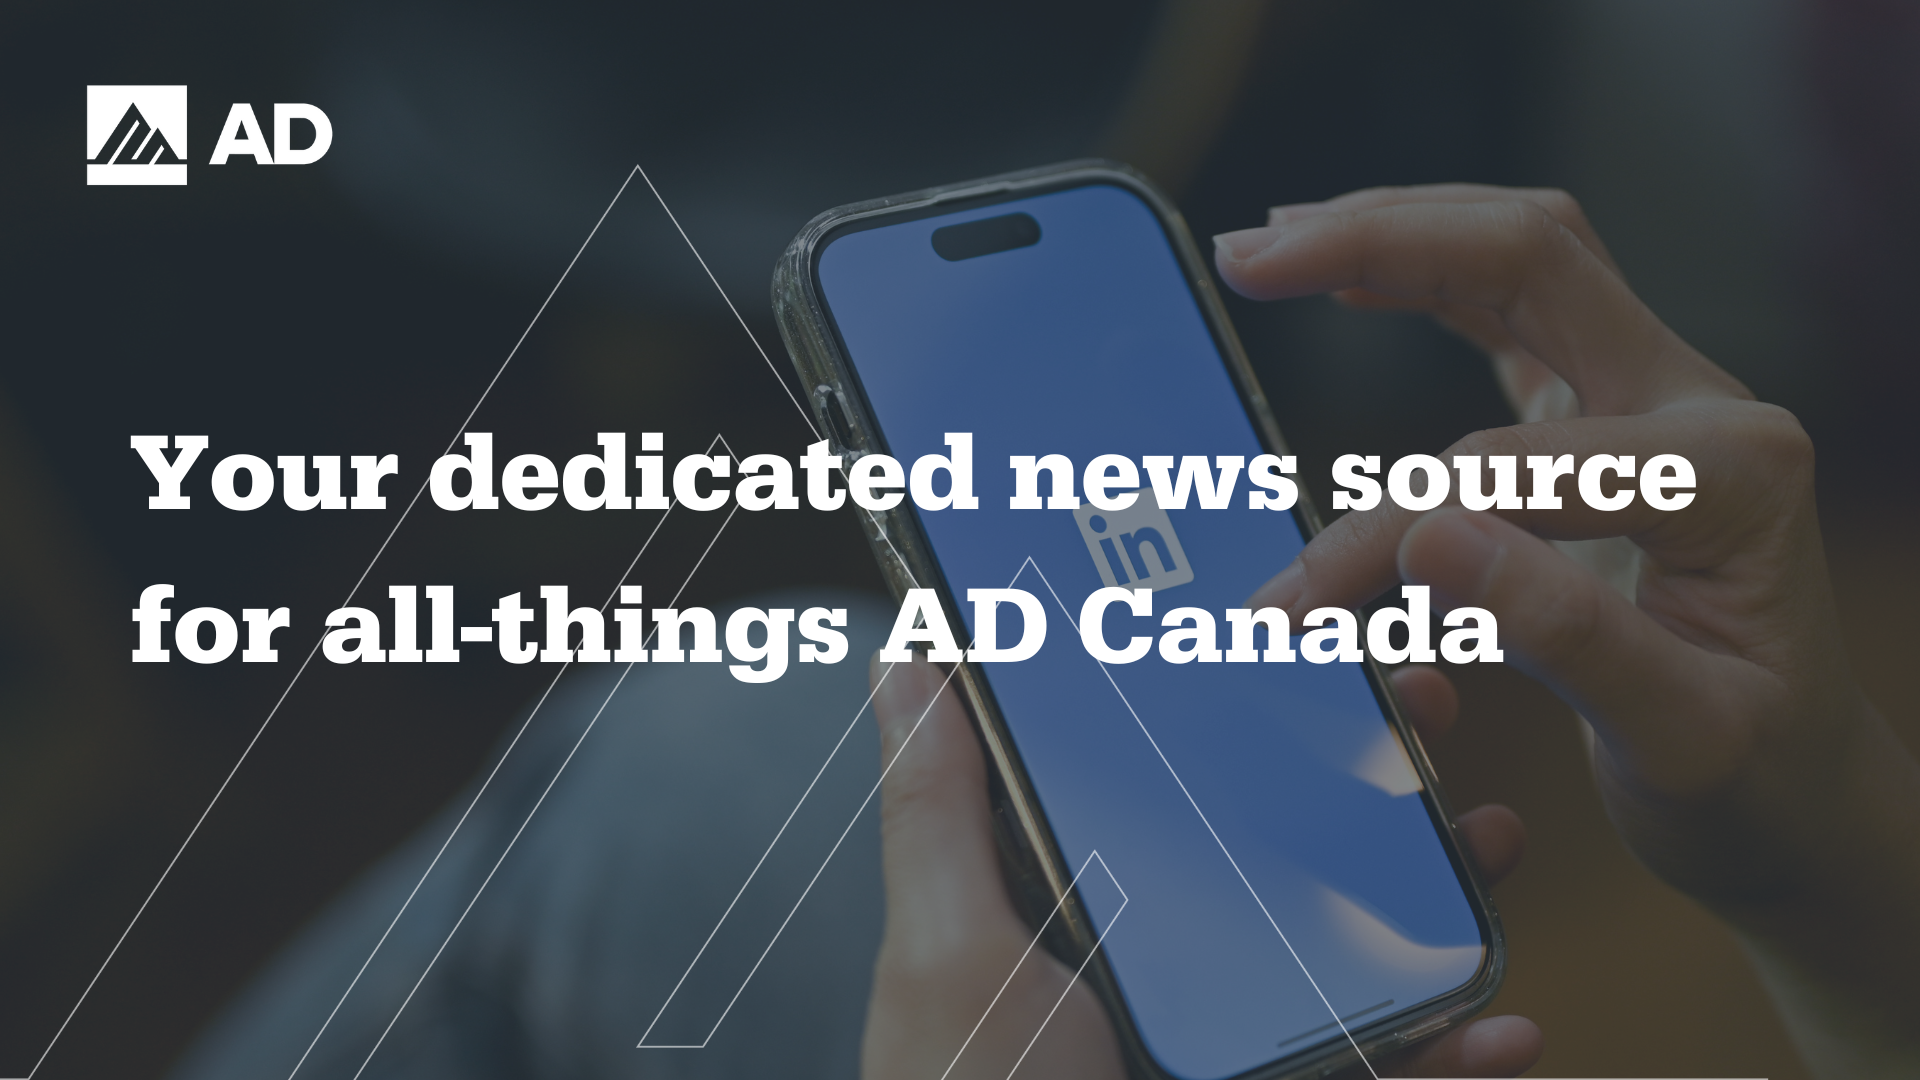 AD Canada LinkedIn page now live!